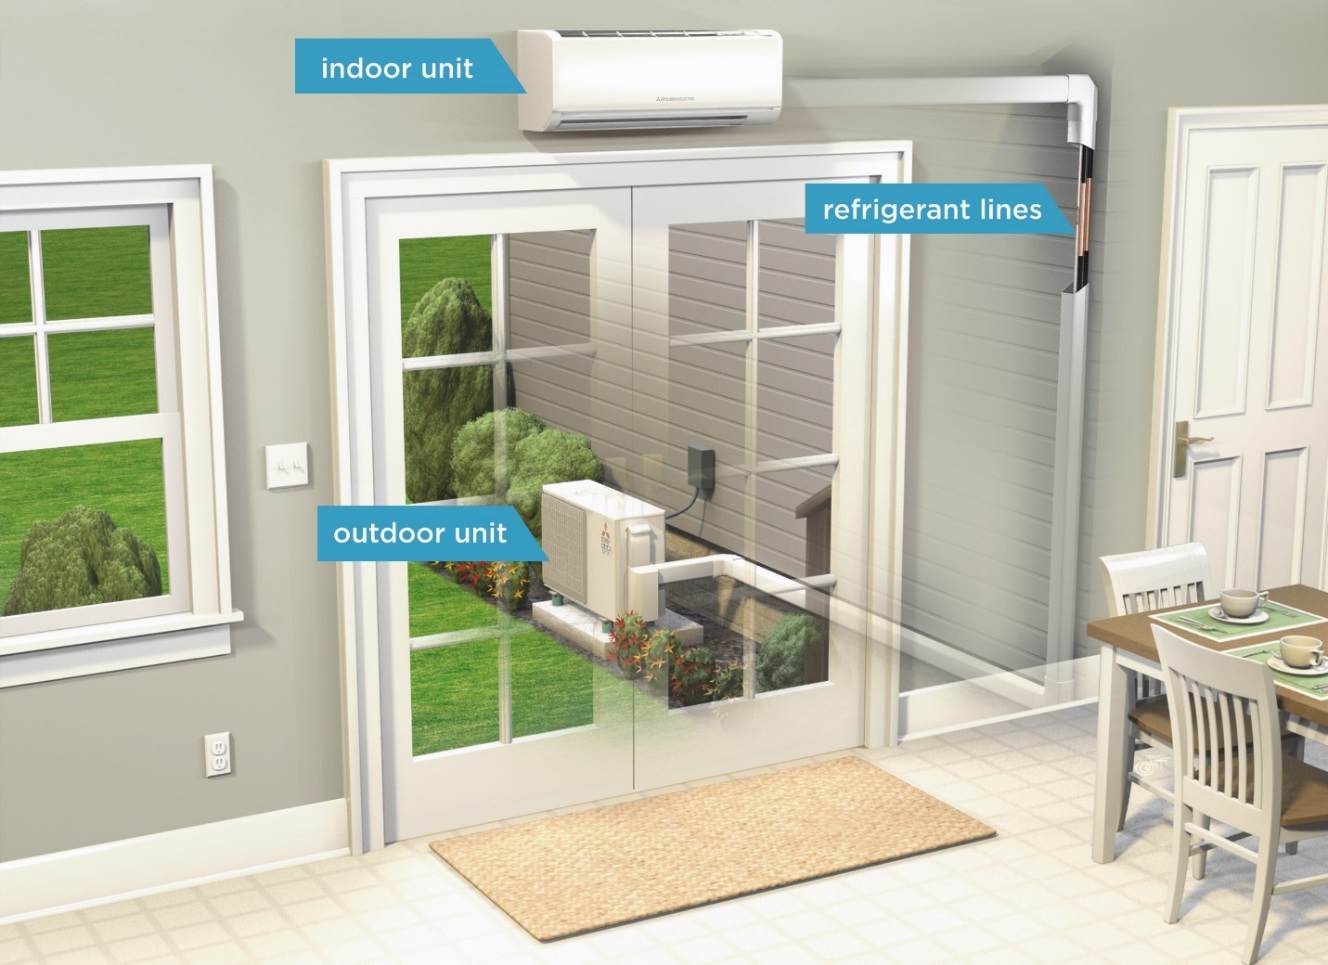 2020 Ductless Heating \u0026 Cooling Cost 